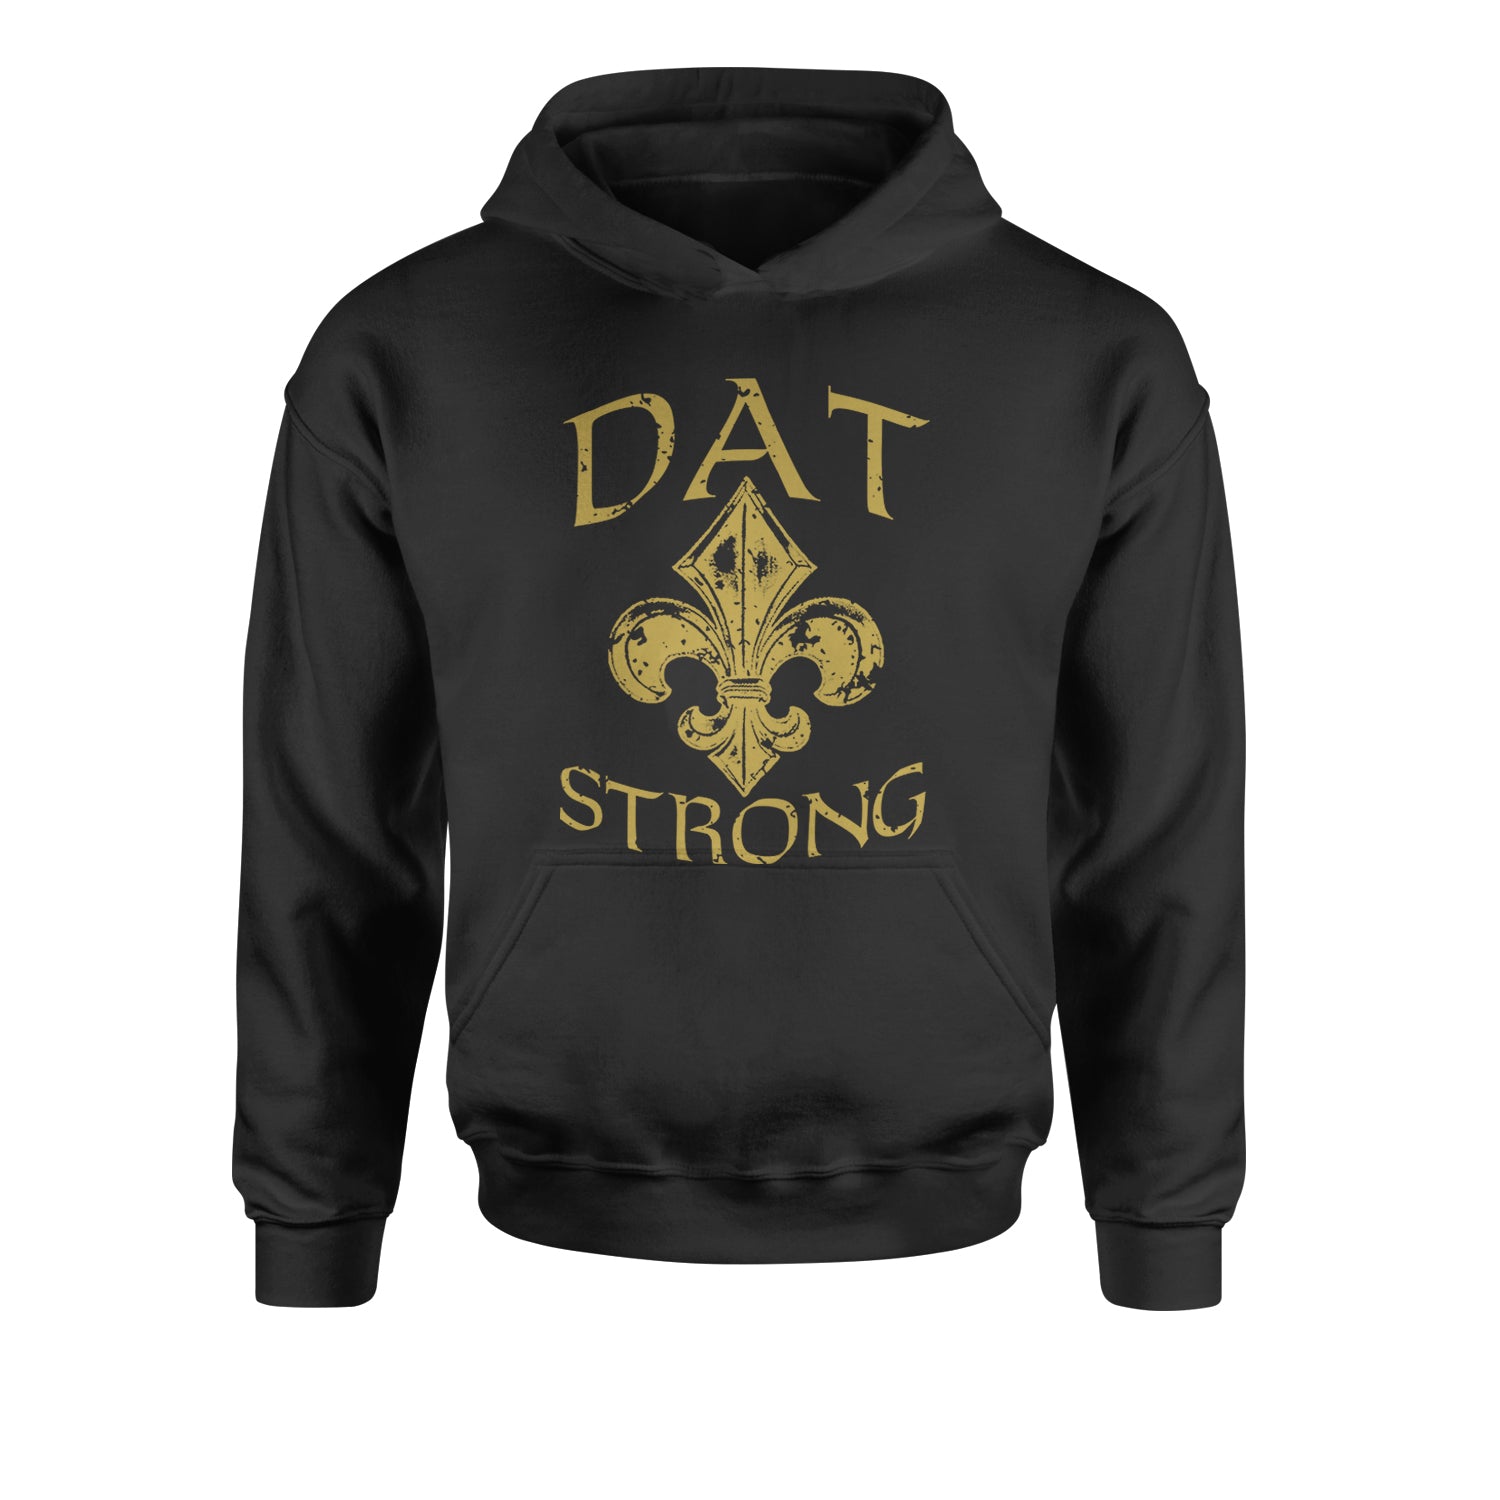 Dat Strong New Orleans Youth-Sized Hoodie dat, de, fan, fleur, jersey, lis, new, orleans, sports, strong, who by Expression Tees